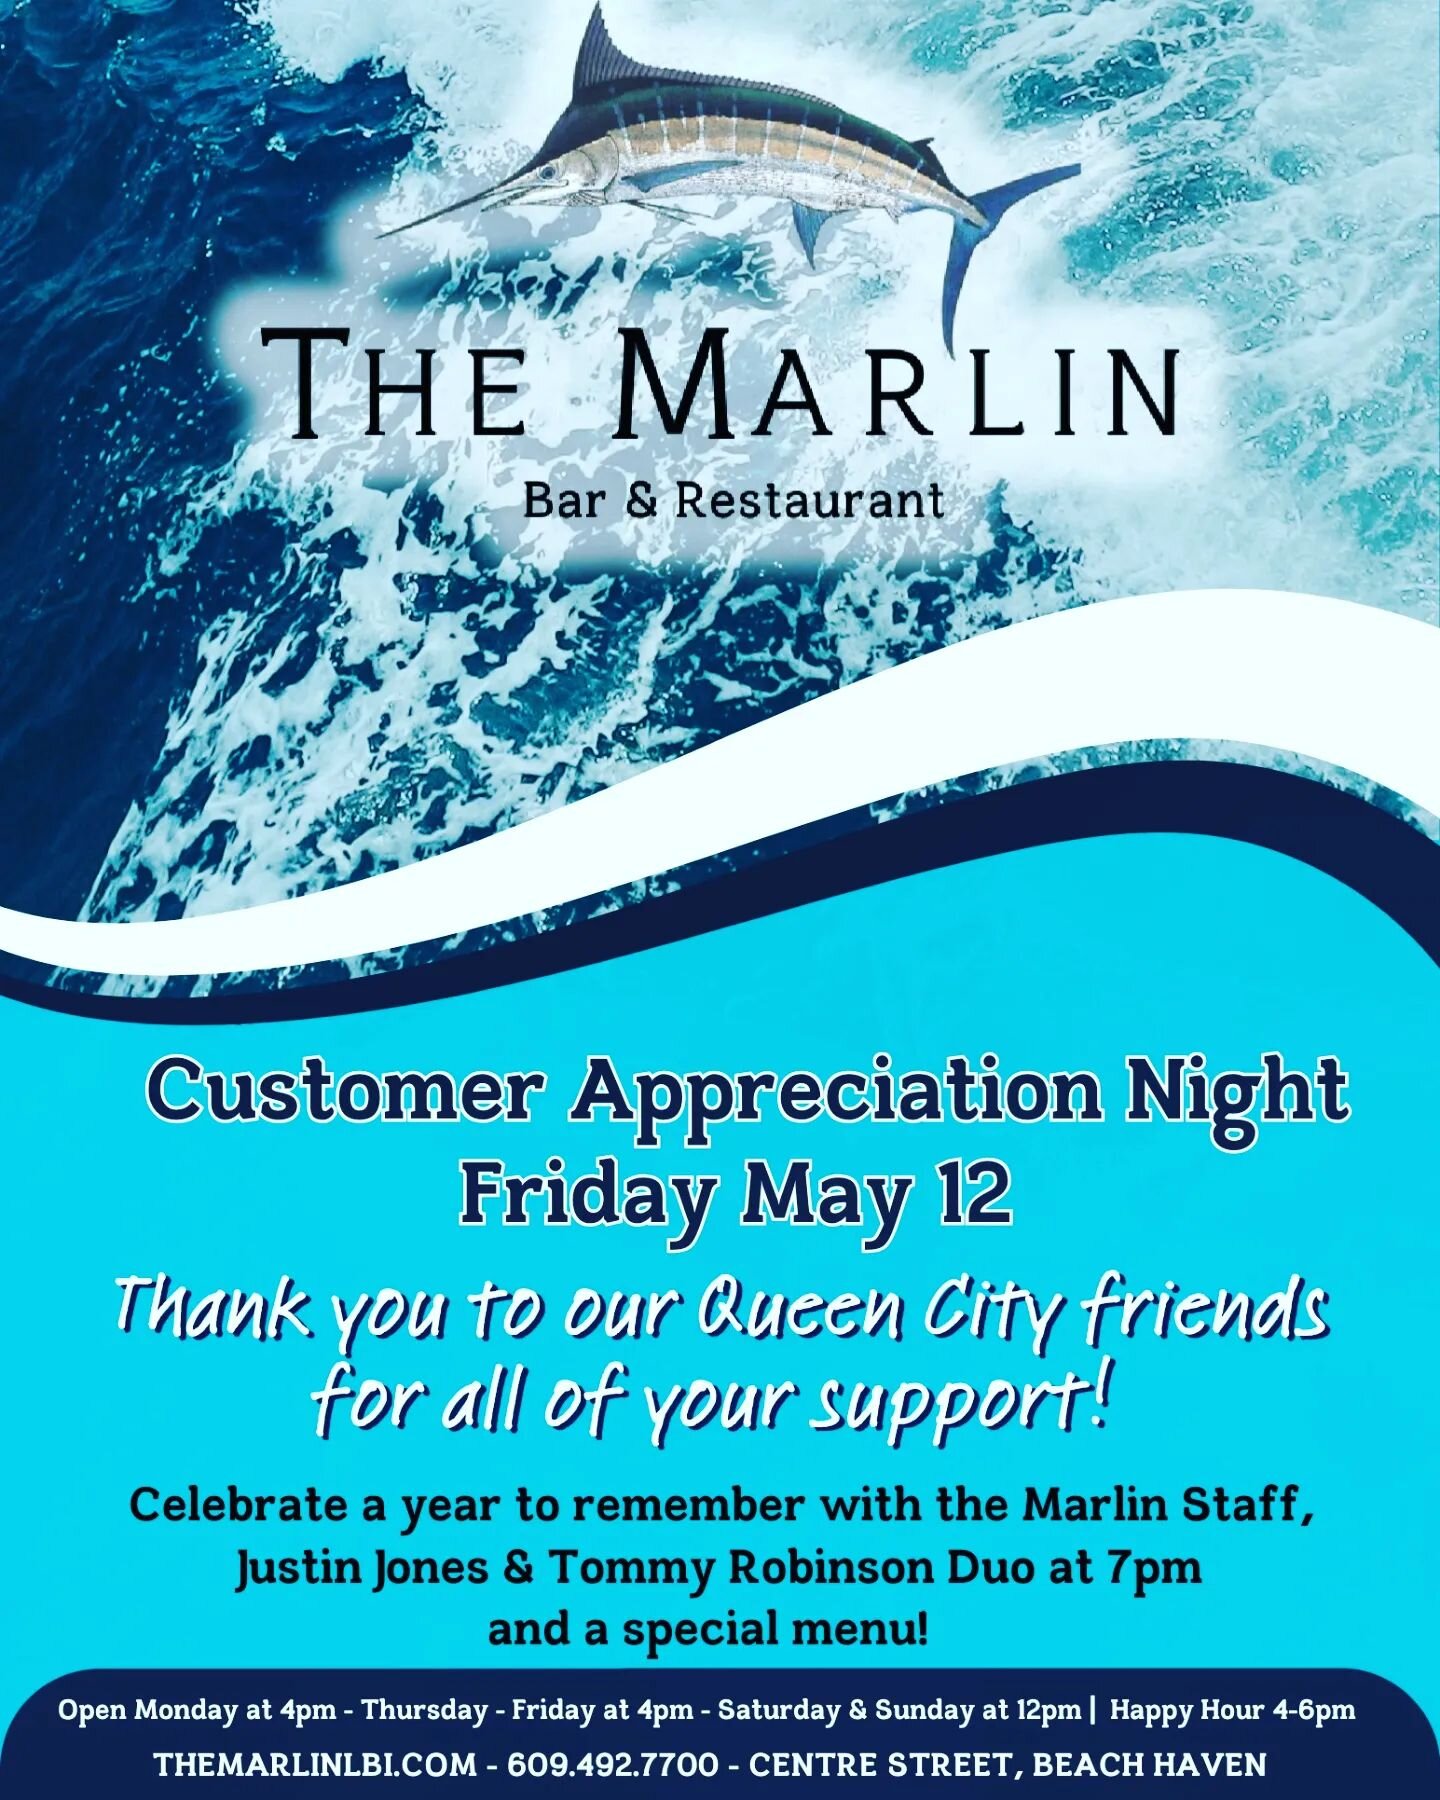 One year ago we re-opened our doors with a new team and a vision to make the Marlin the place for all. The place where age was just a number and you could would walk in the door a stranger and leave as a friend.

From teen night to night club, prime 